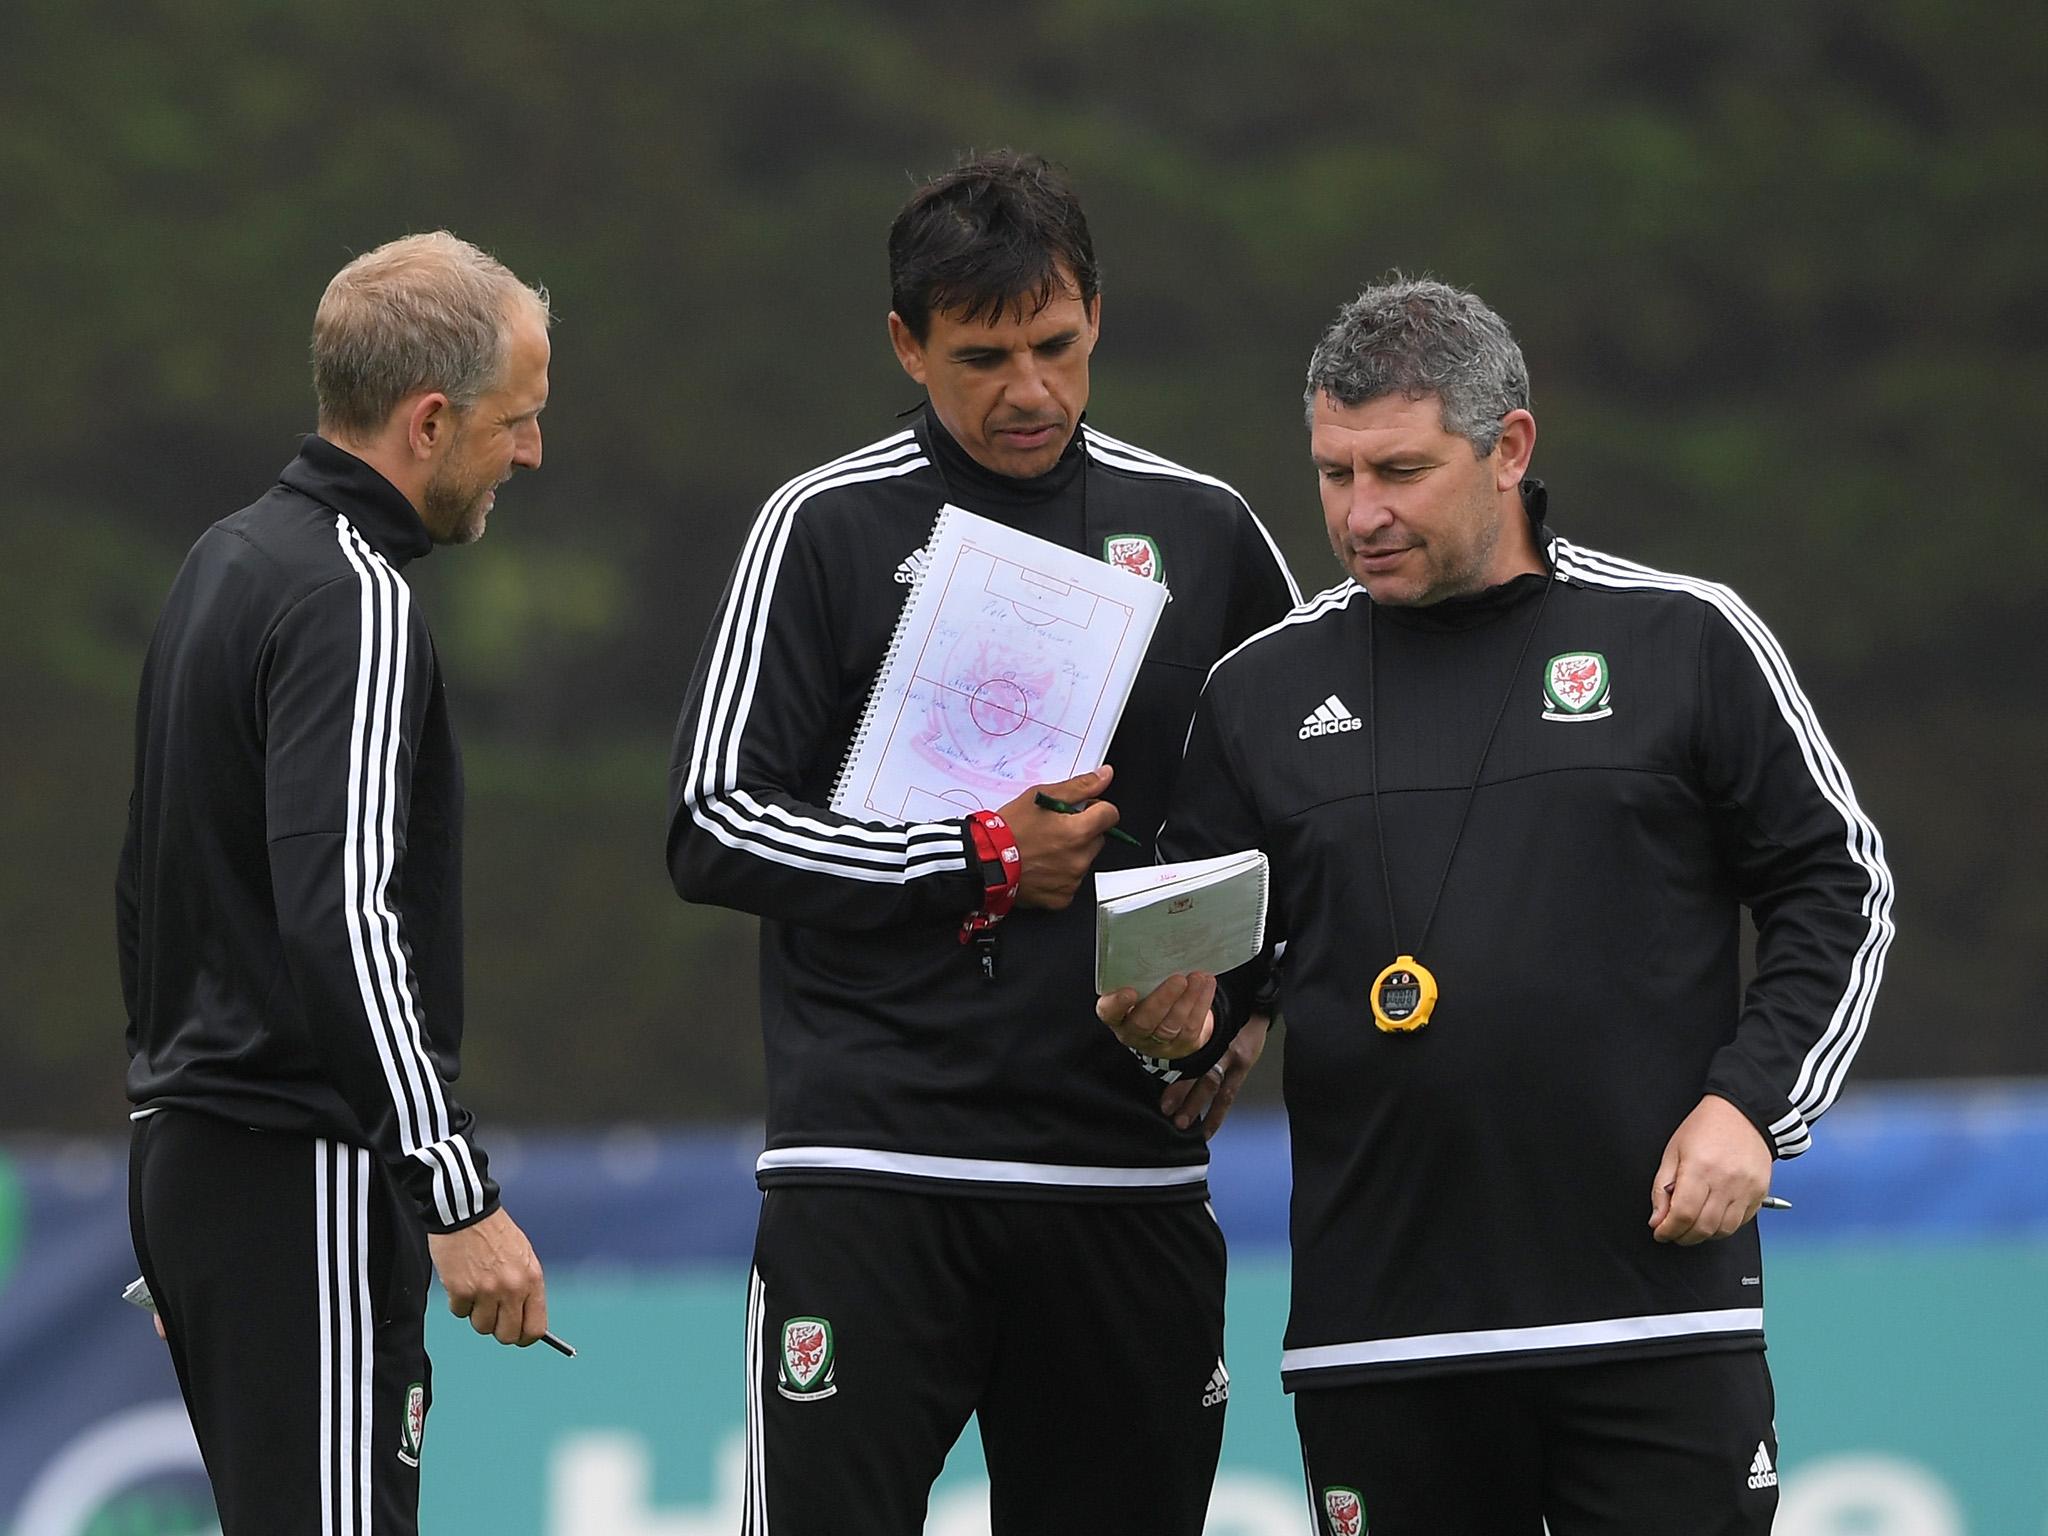 Chris Coleman, the Wales manager, reveals a team sheet with some high-profile names